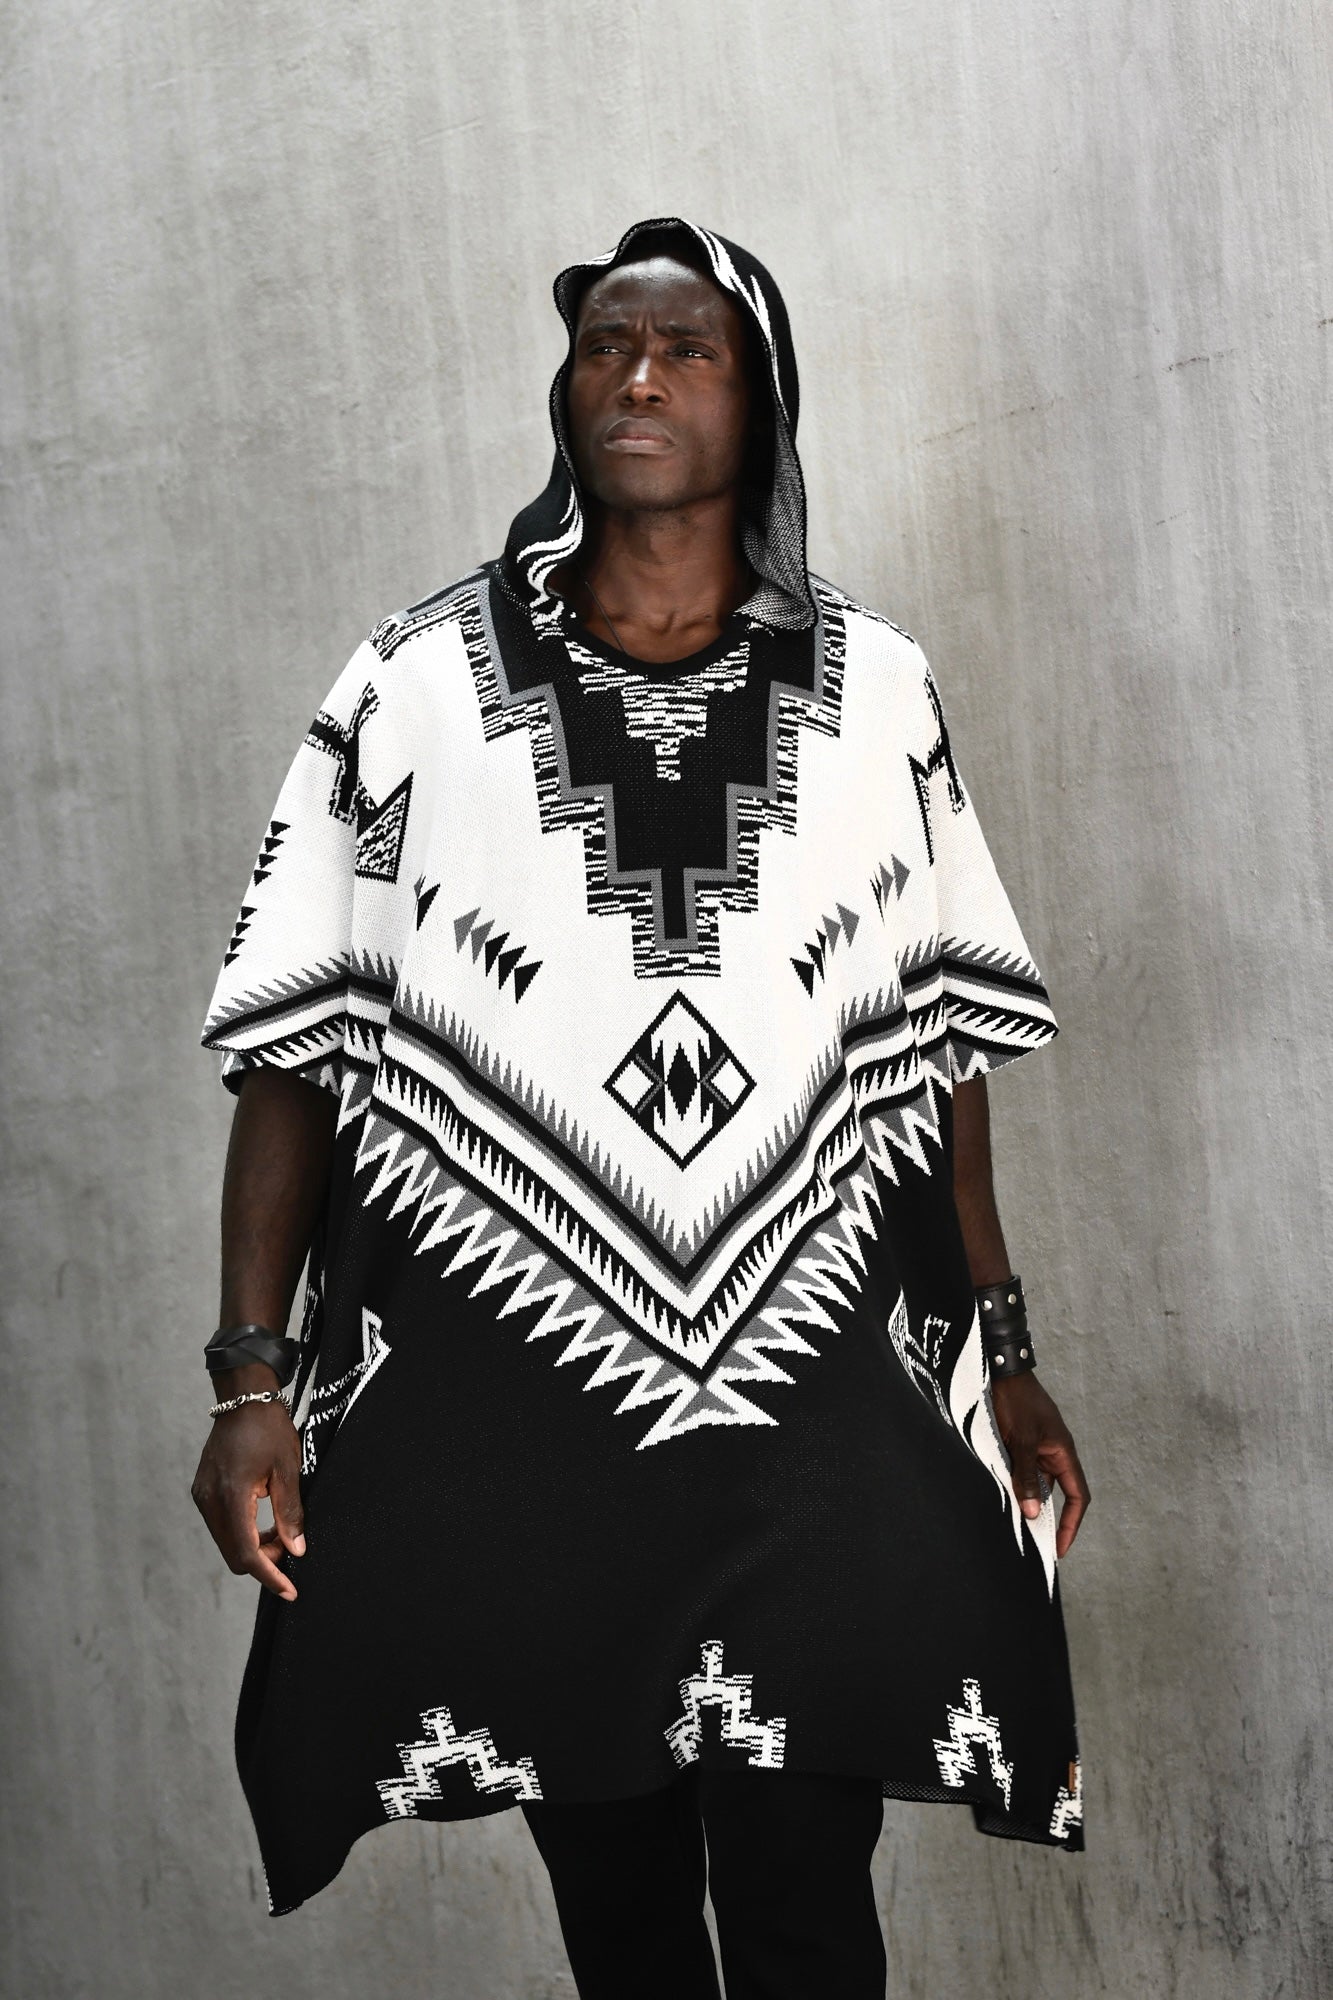 Men’s Hooded Poncho in Black White and Grey ZG5605